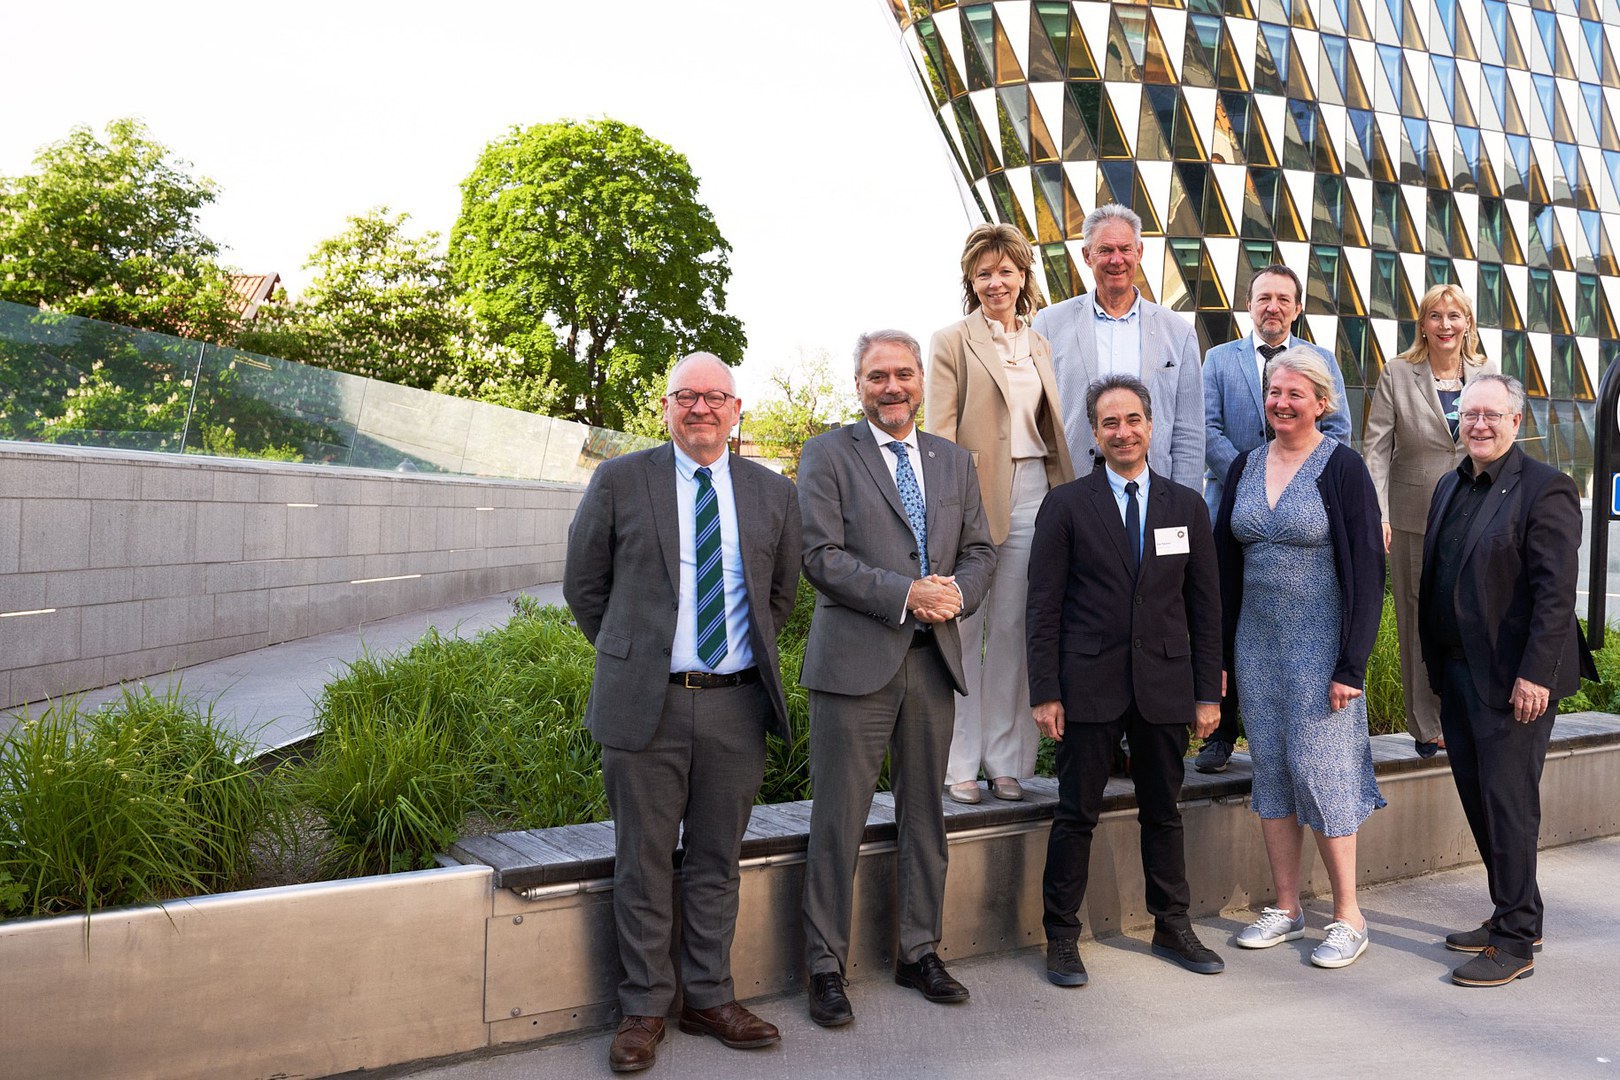 NeurotechEU Board of Rectors - The Board of Rectors of the European University NeurotechEU met in Stockholm. Rector Michael Hoch (right) with his counterparts from the partner institutions.